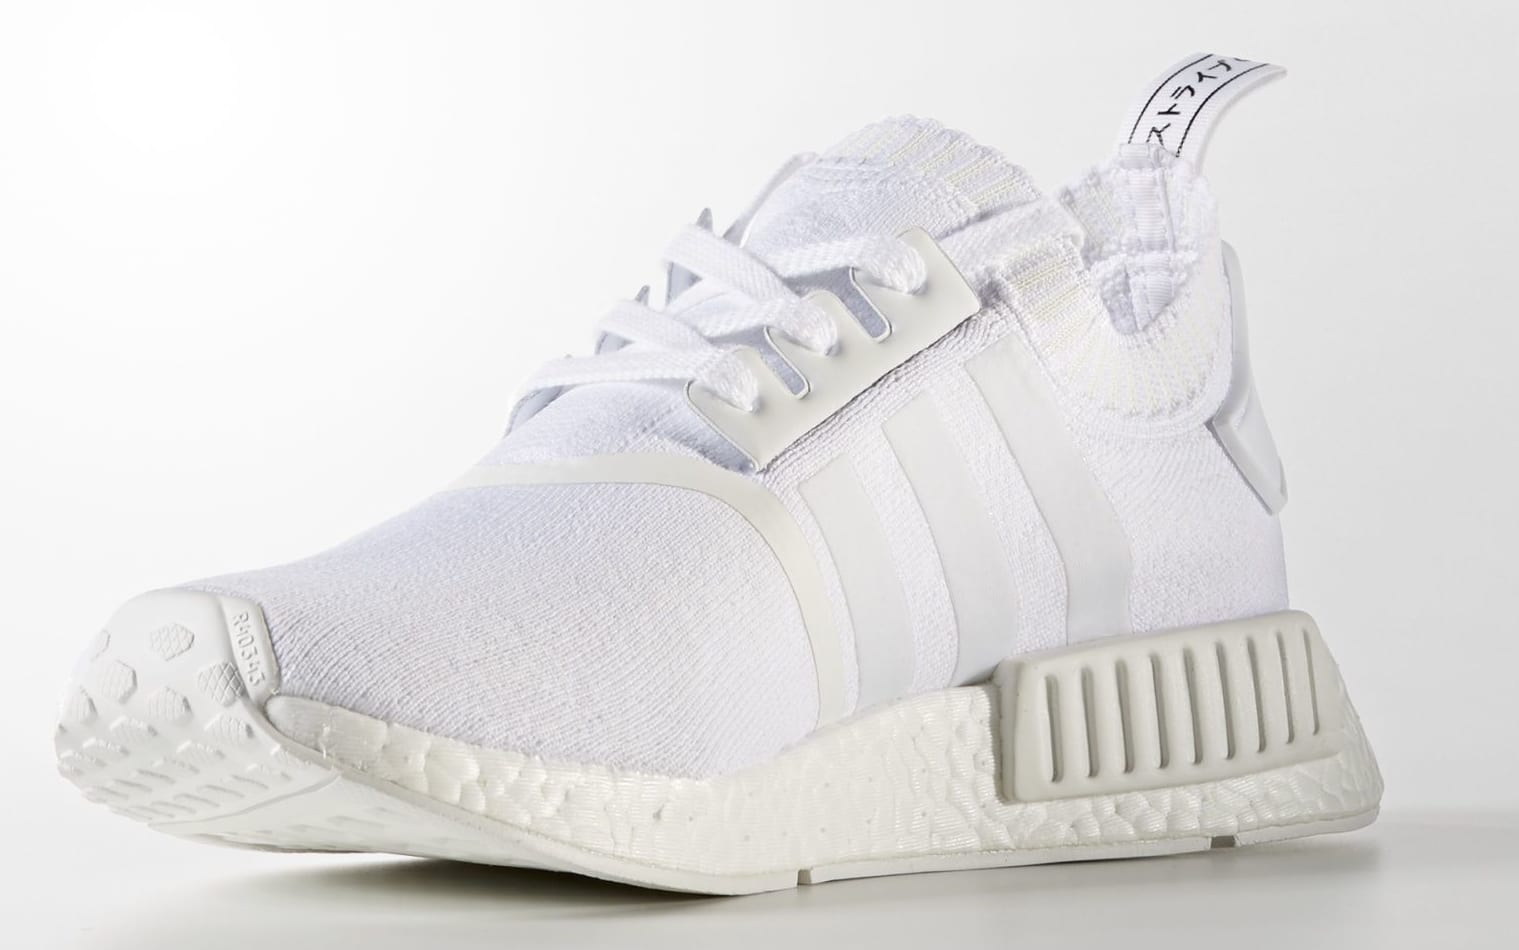 Japan Pack' Adidas NMDs in Triple White Triple Black Release on Aug. 11 | Complex